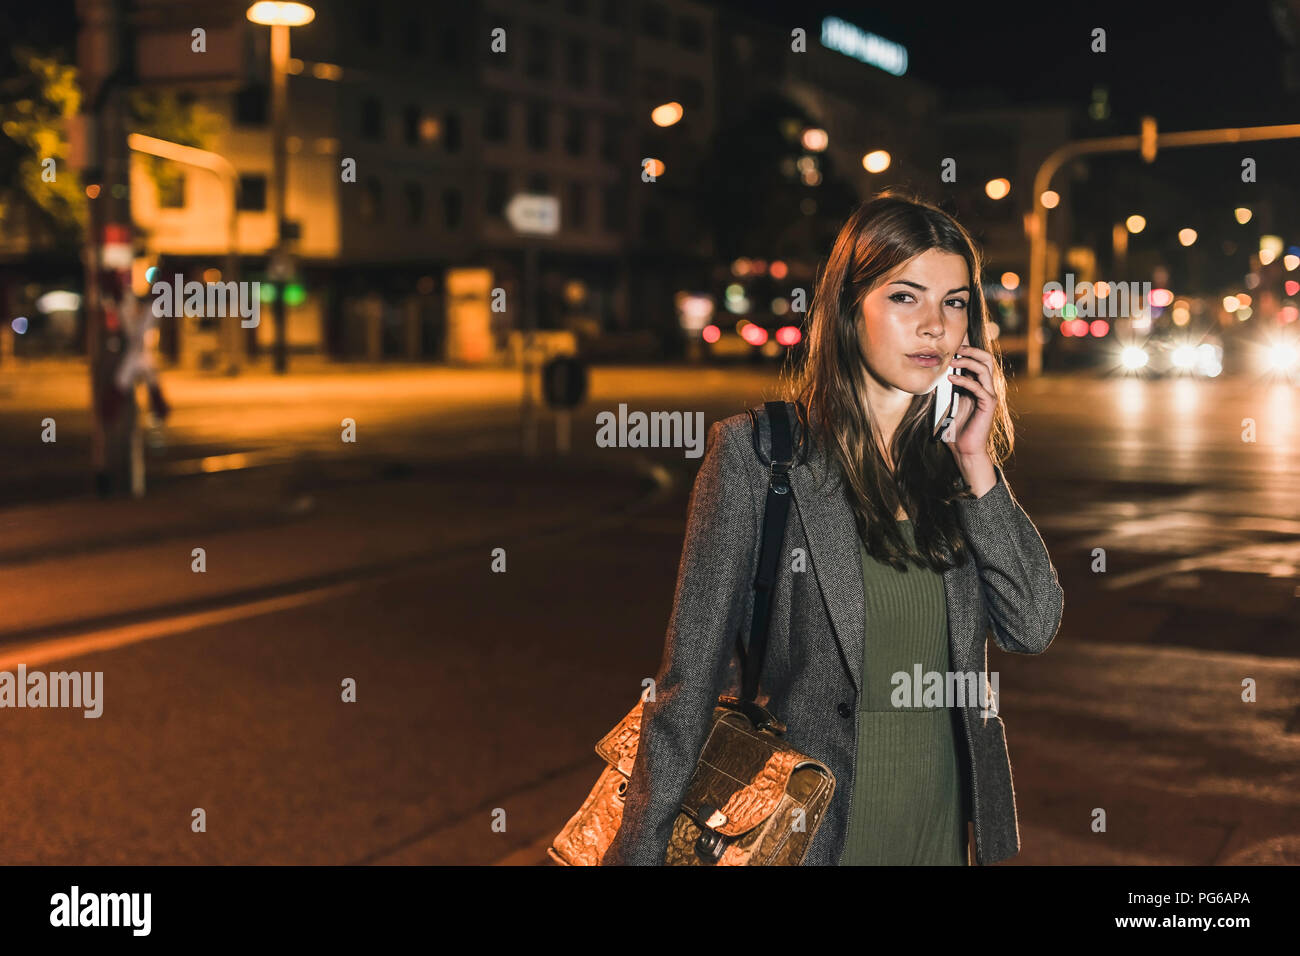 Portrait of young businesswoman with leather bag on the phone at night Stock Photo